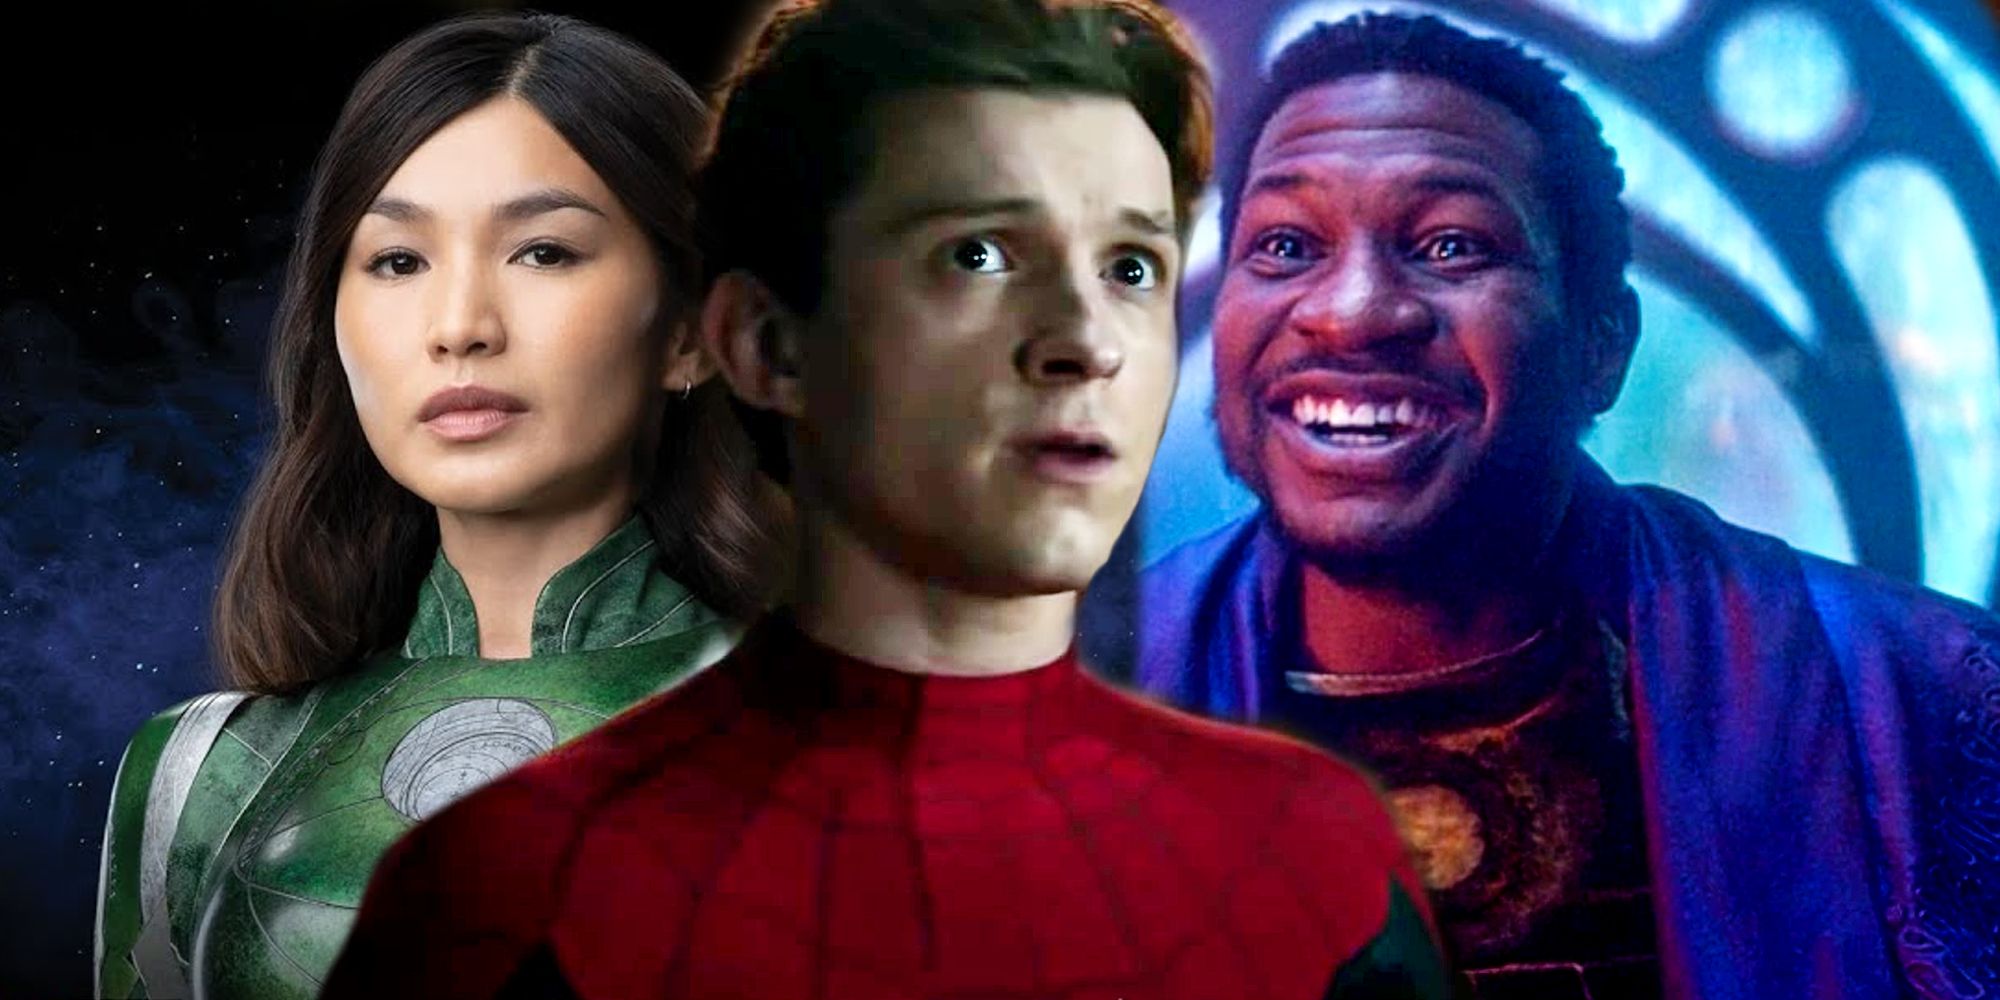 Spider-Man, Eternals, and Loki in the MCU's Phase 4